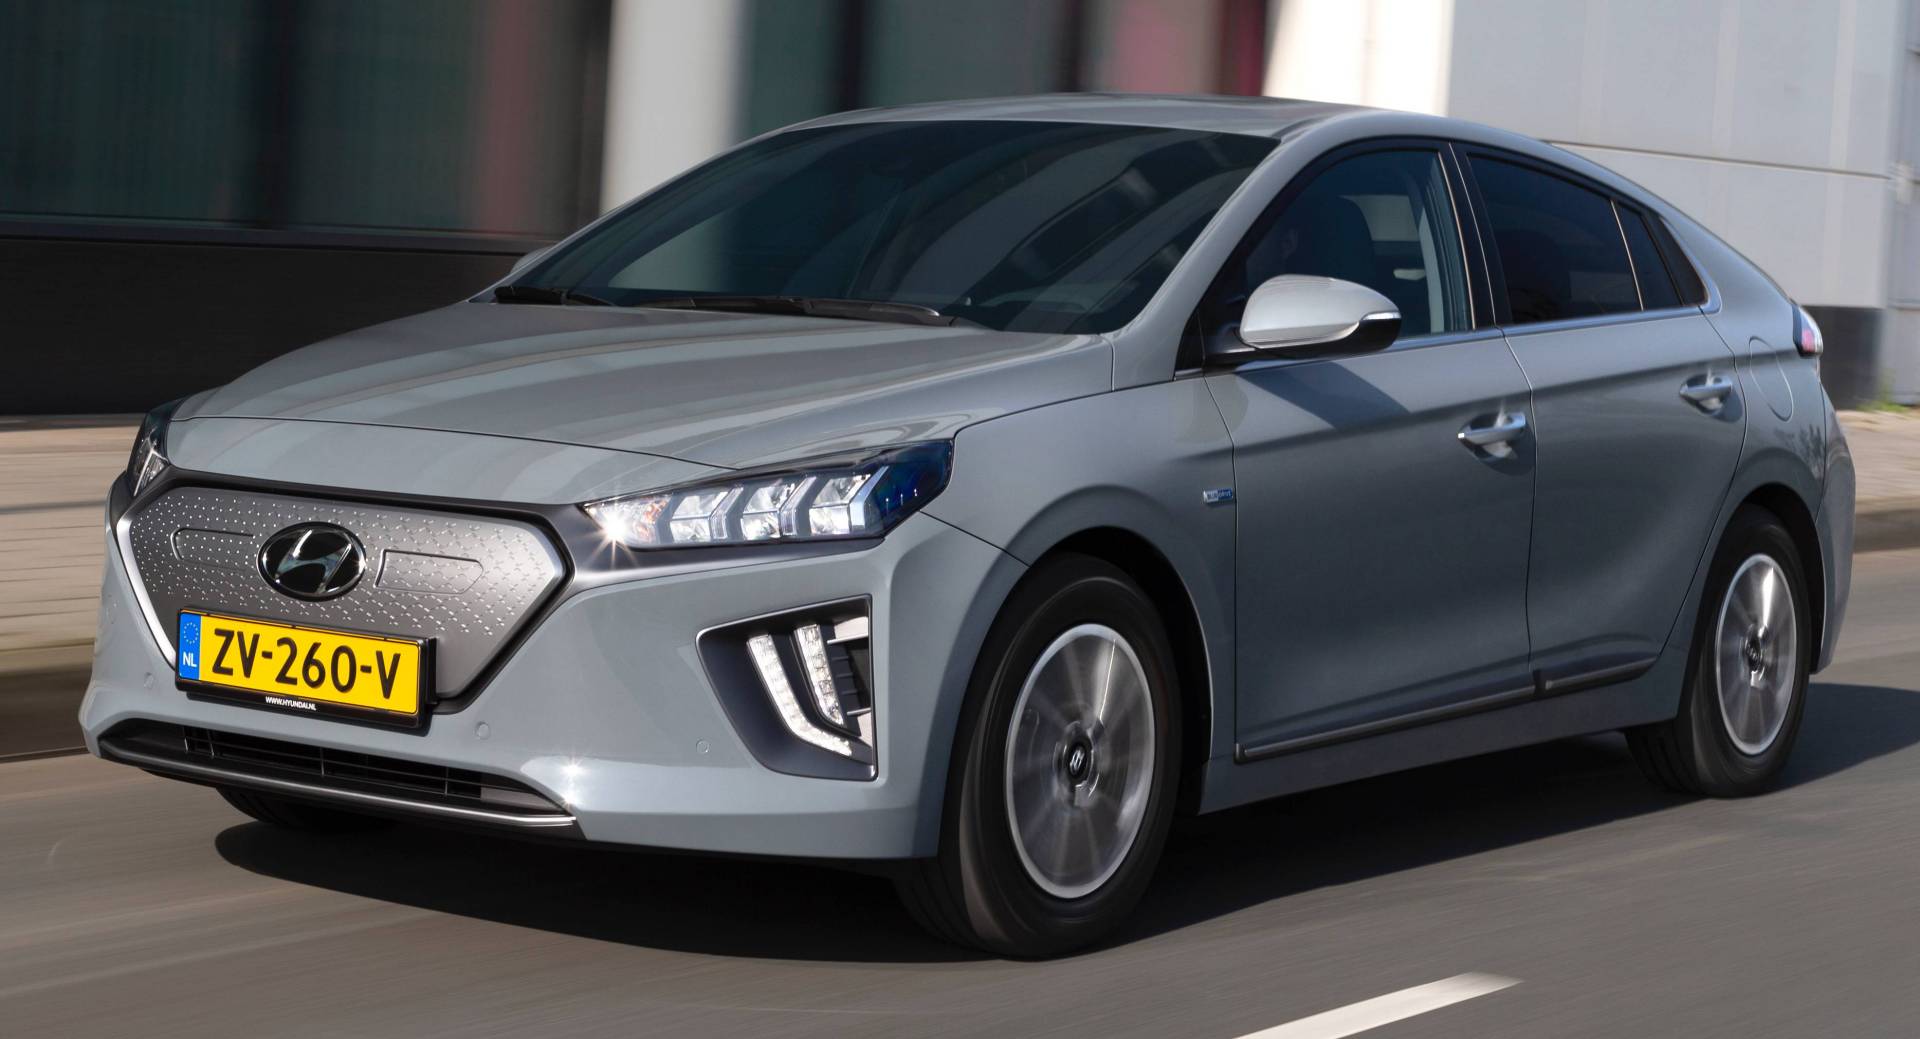 Facelifted 2020 Hyundai Ioniq Electric: Final Specs And New Photos